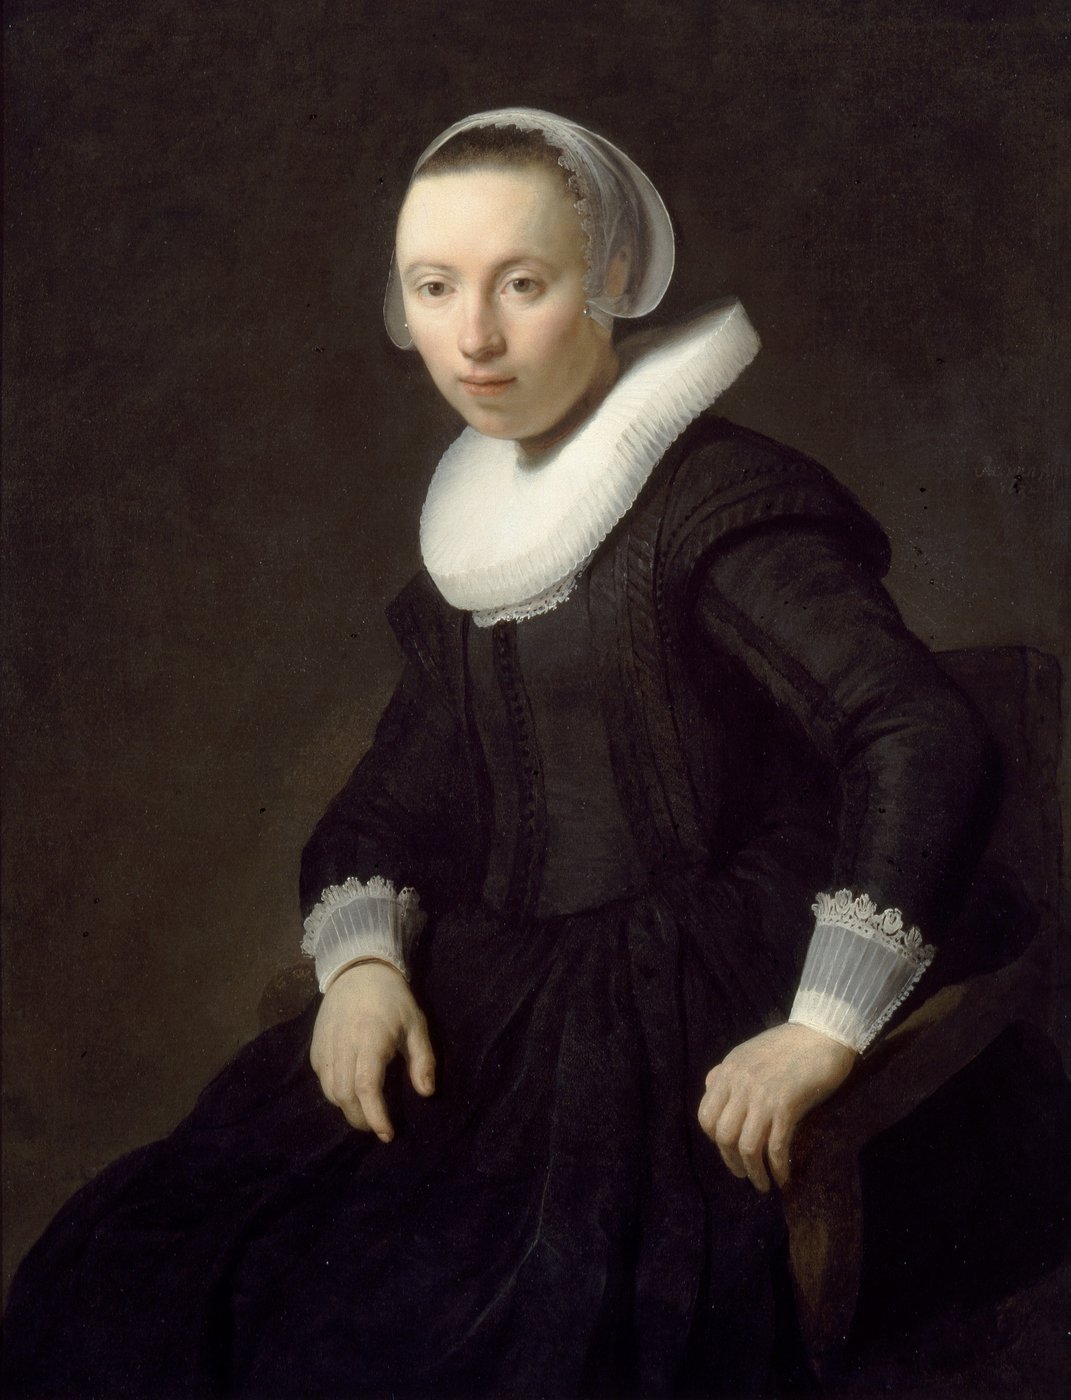 A historical portrait painting of woman in black dress with white fan collar and white headscarf and she is sitting on wooden chair.